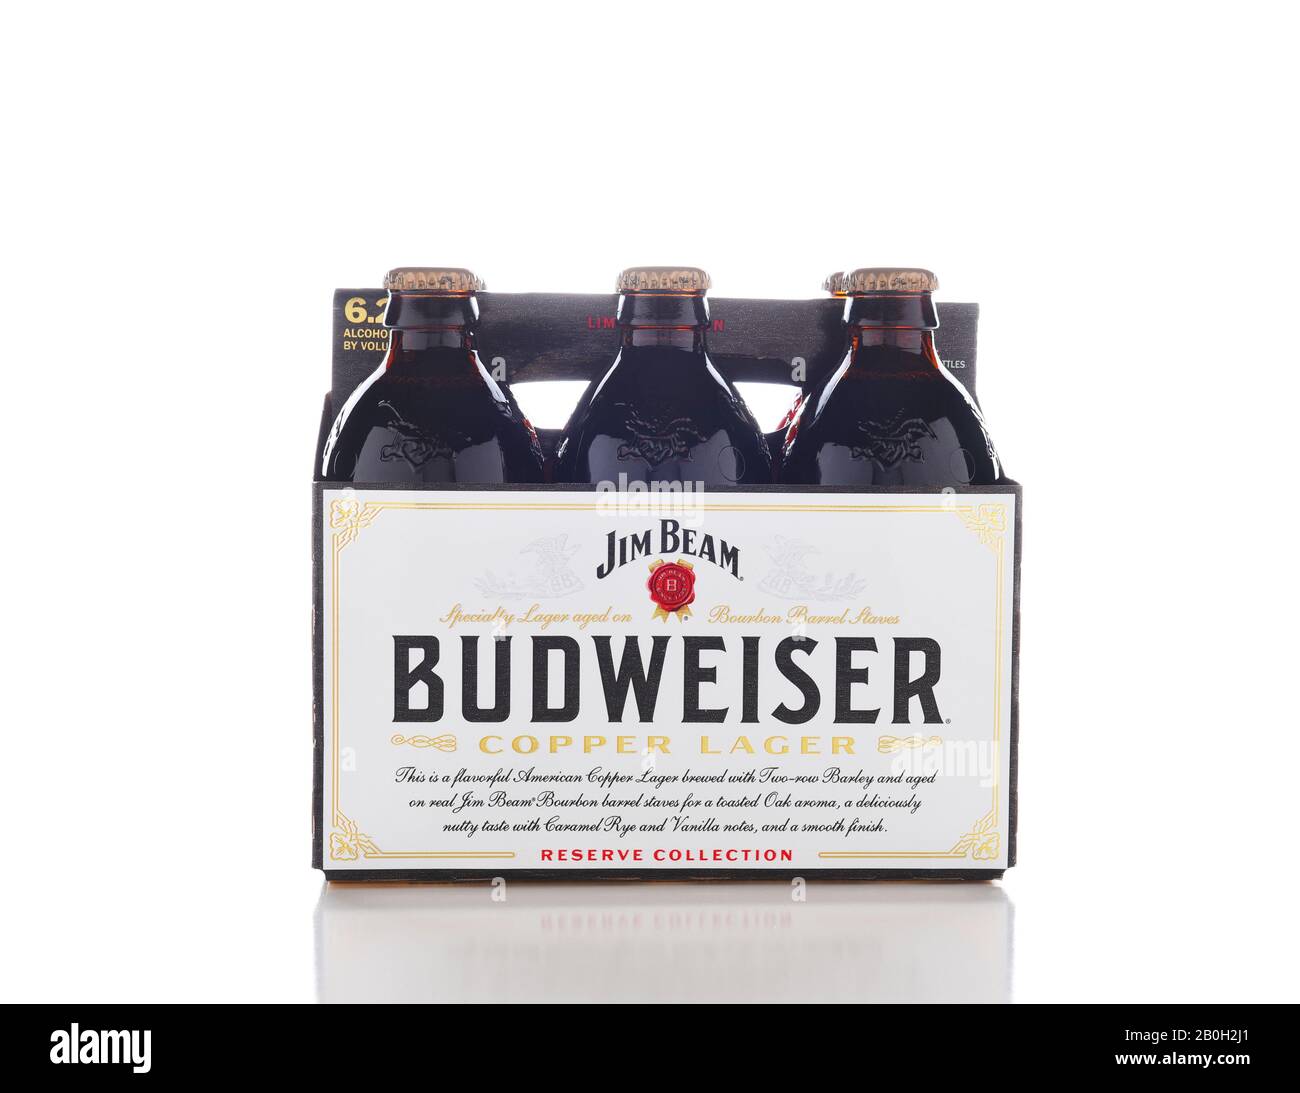 IRVINE, CALIFORNIA - OCTOBER 17, 2018: Budweiser Copper Lager Reserve Collection. The limited edition beer is aged on Jim Beam Bourbon Barrel Staves. Stock Photo